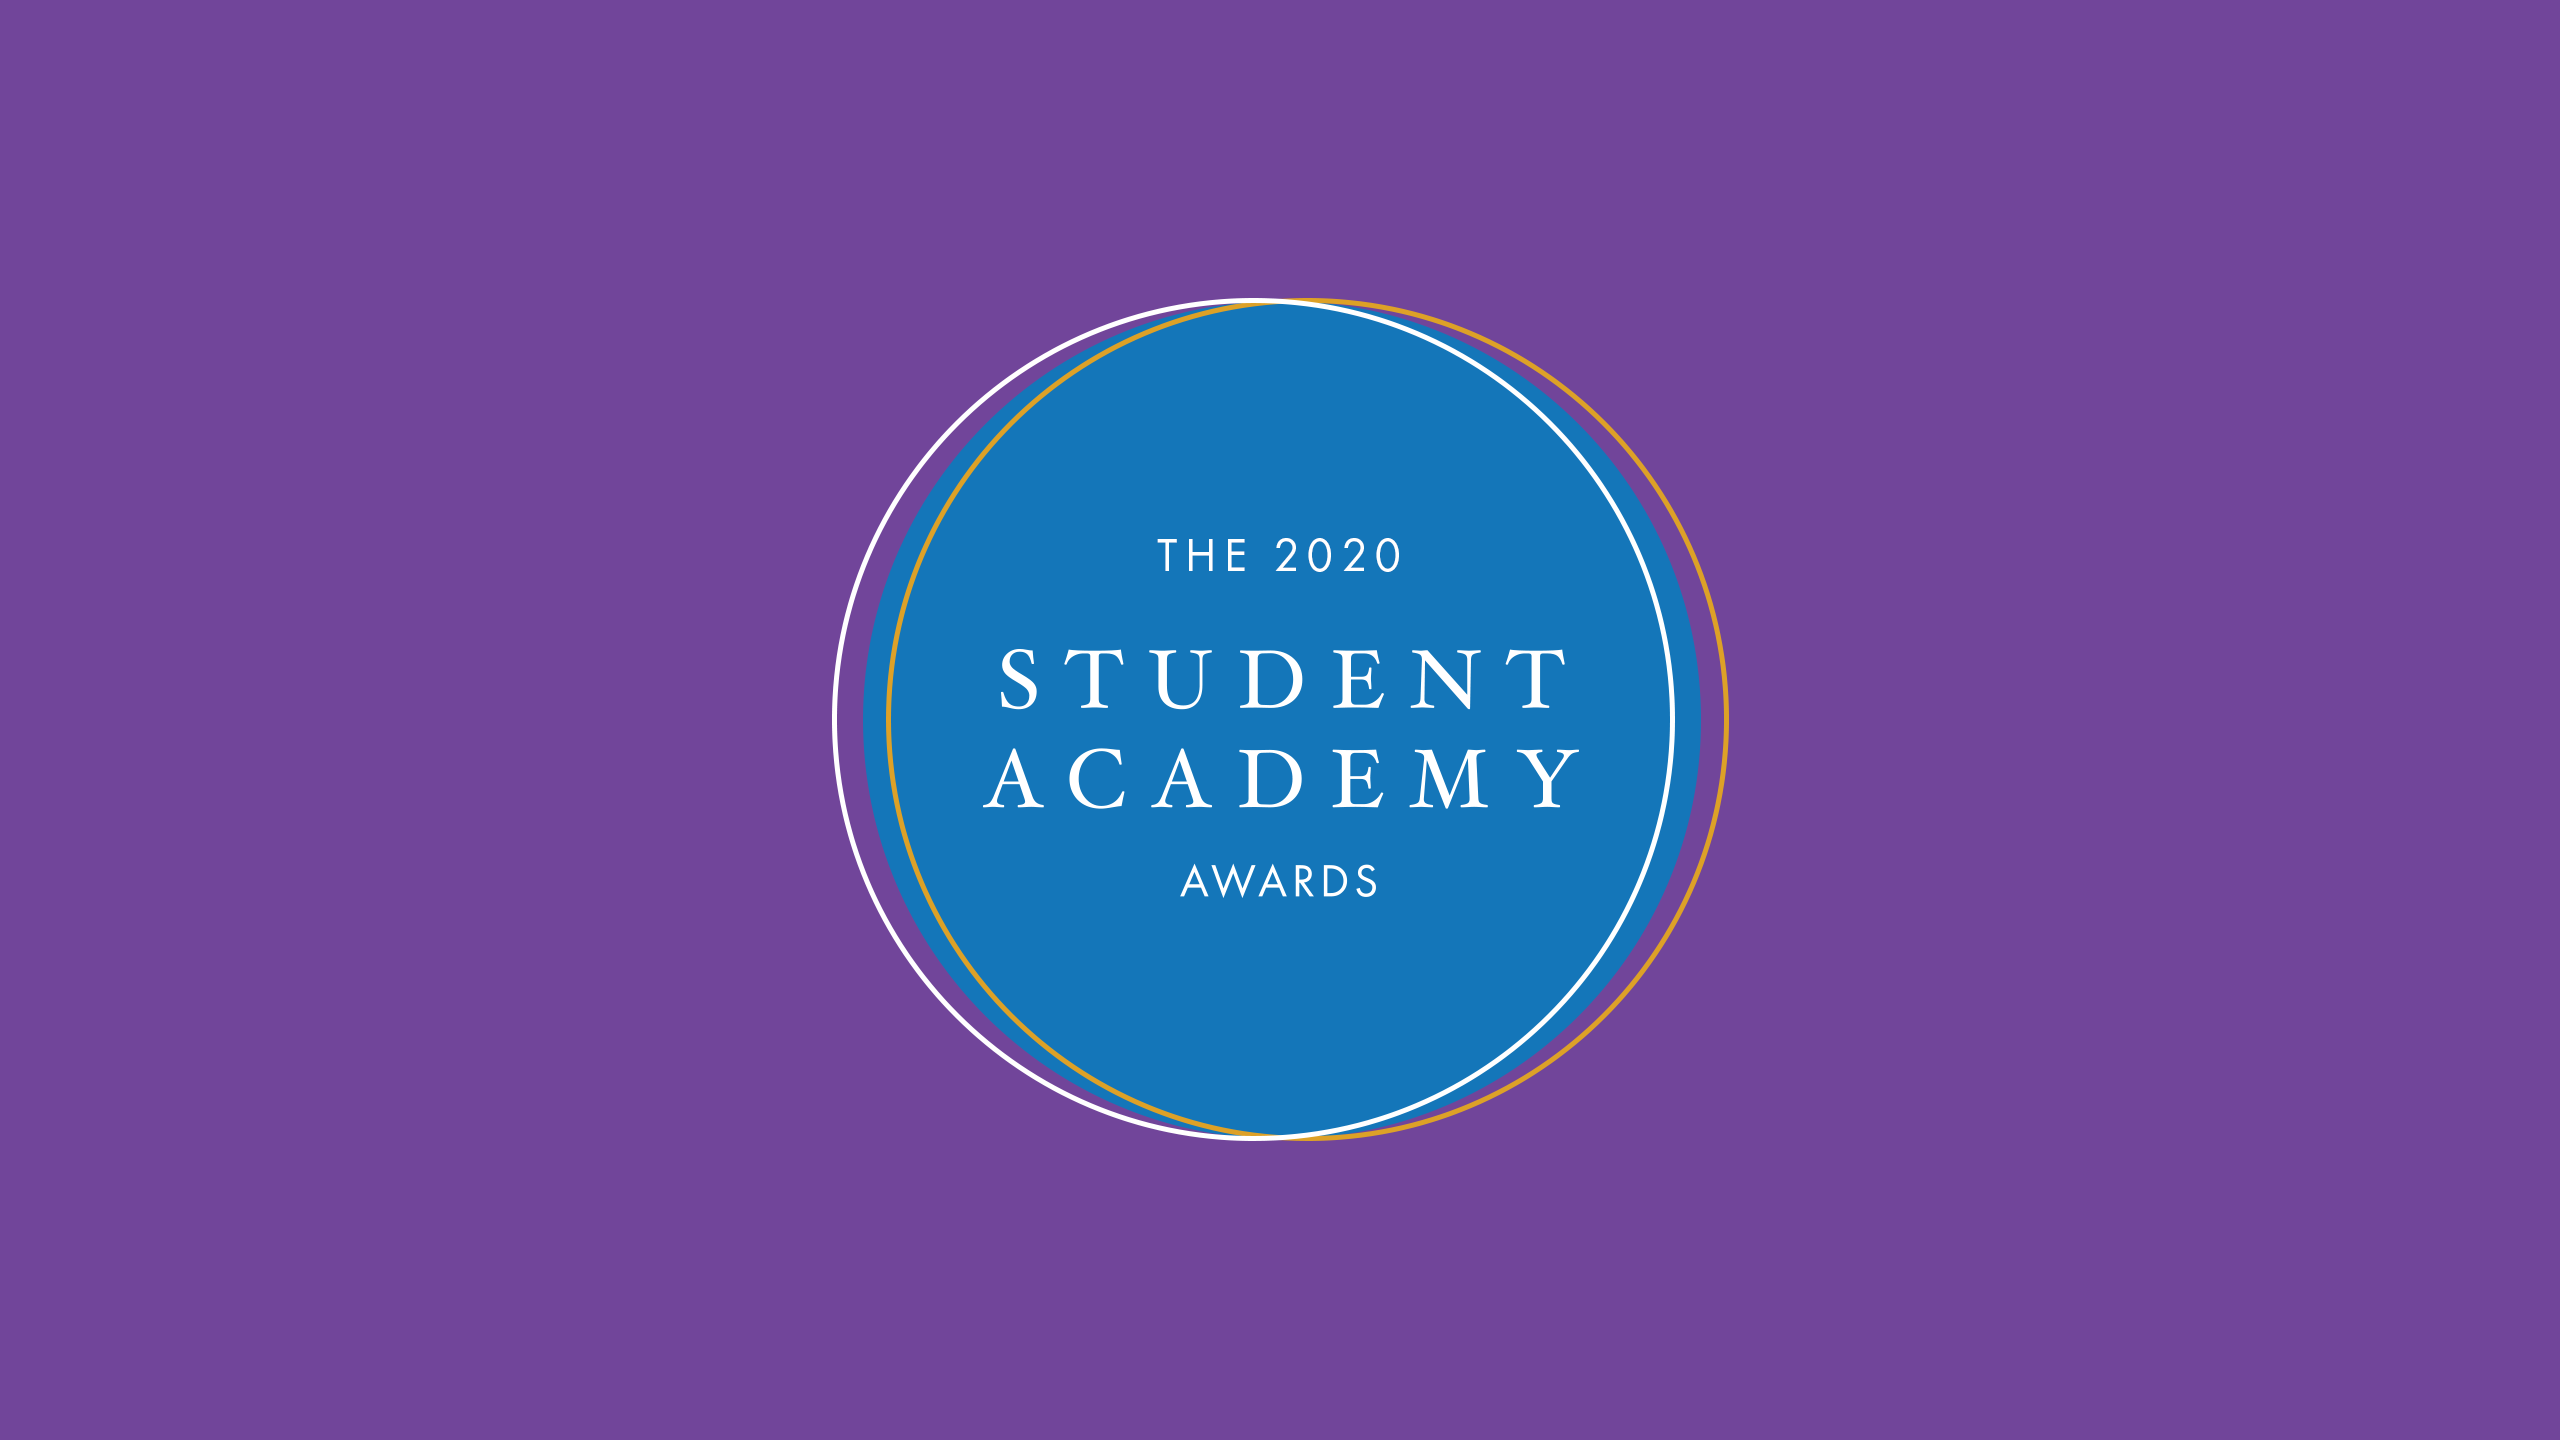 MEDALISTS REVEALED FOR 2020 STUDENT ACADEMY AWARDS®